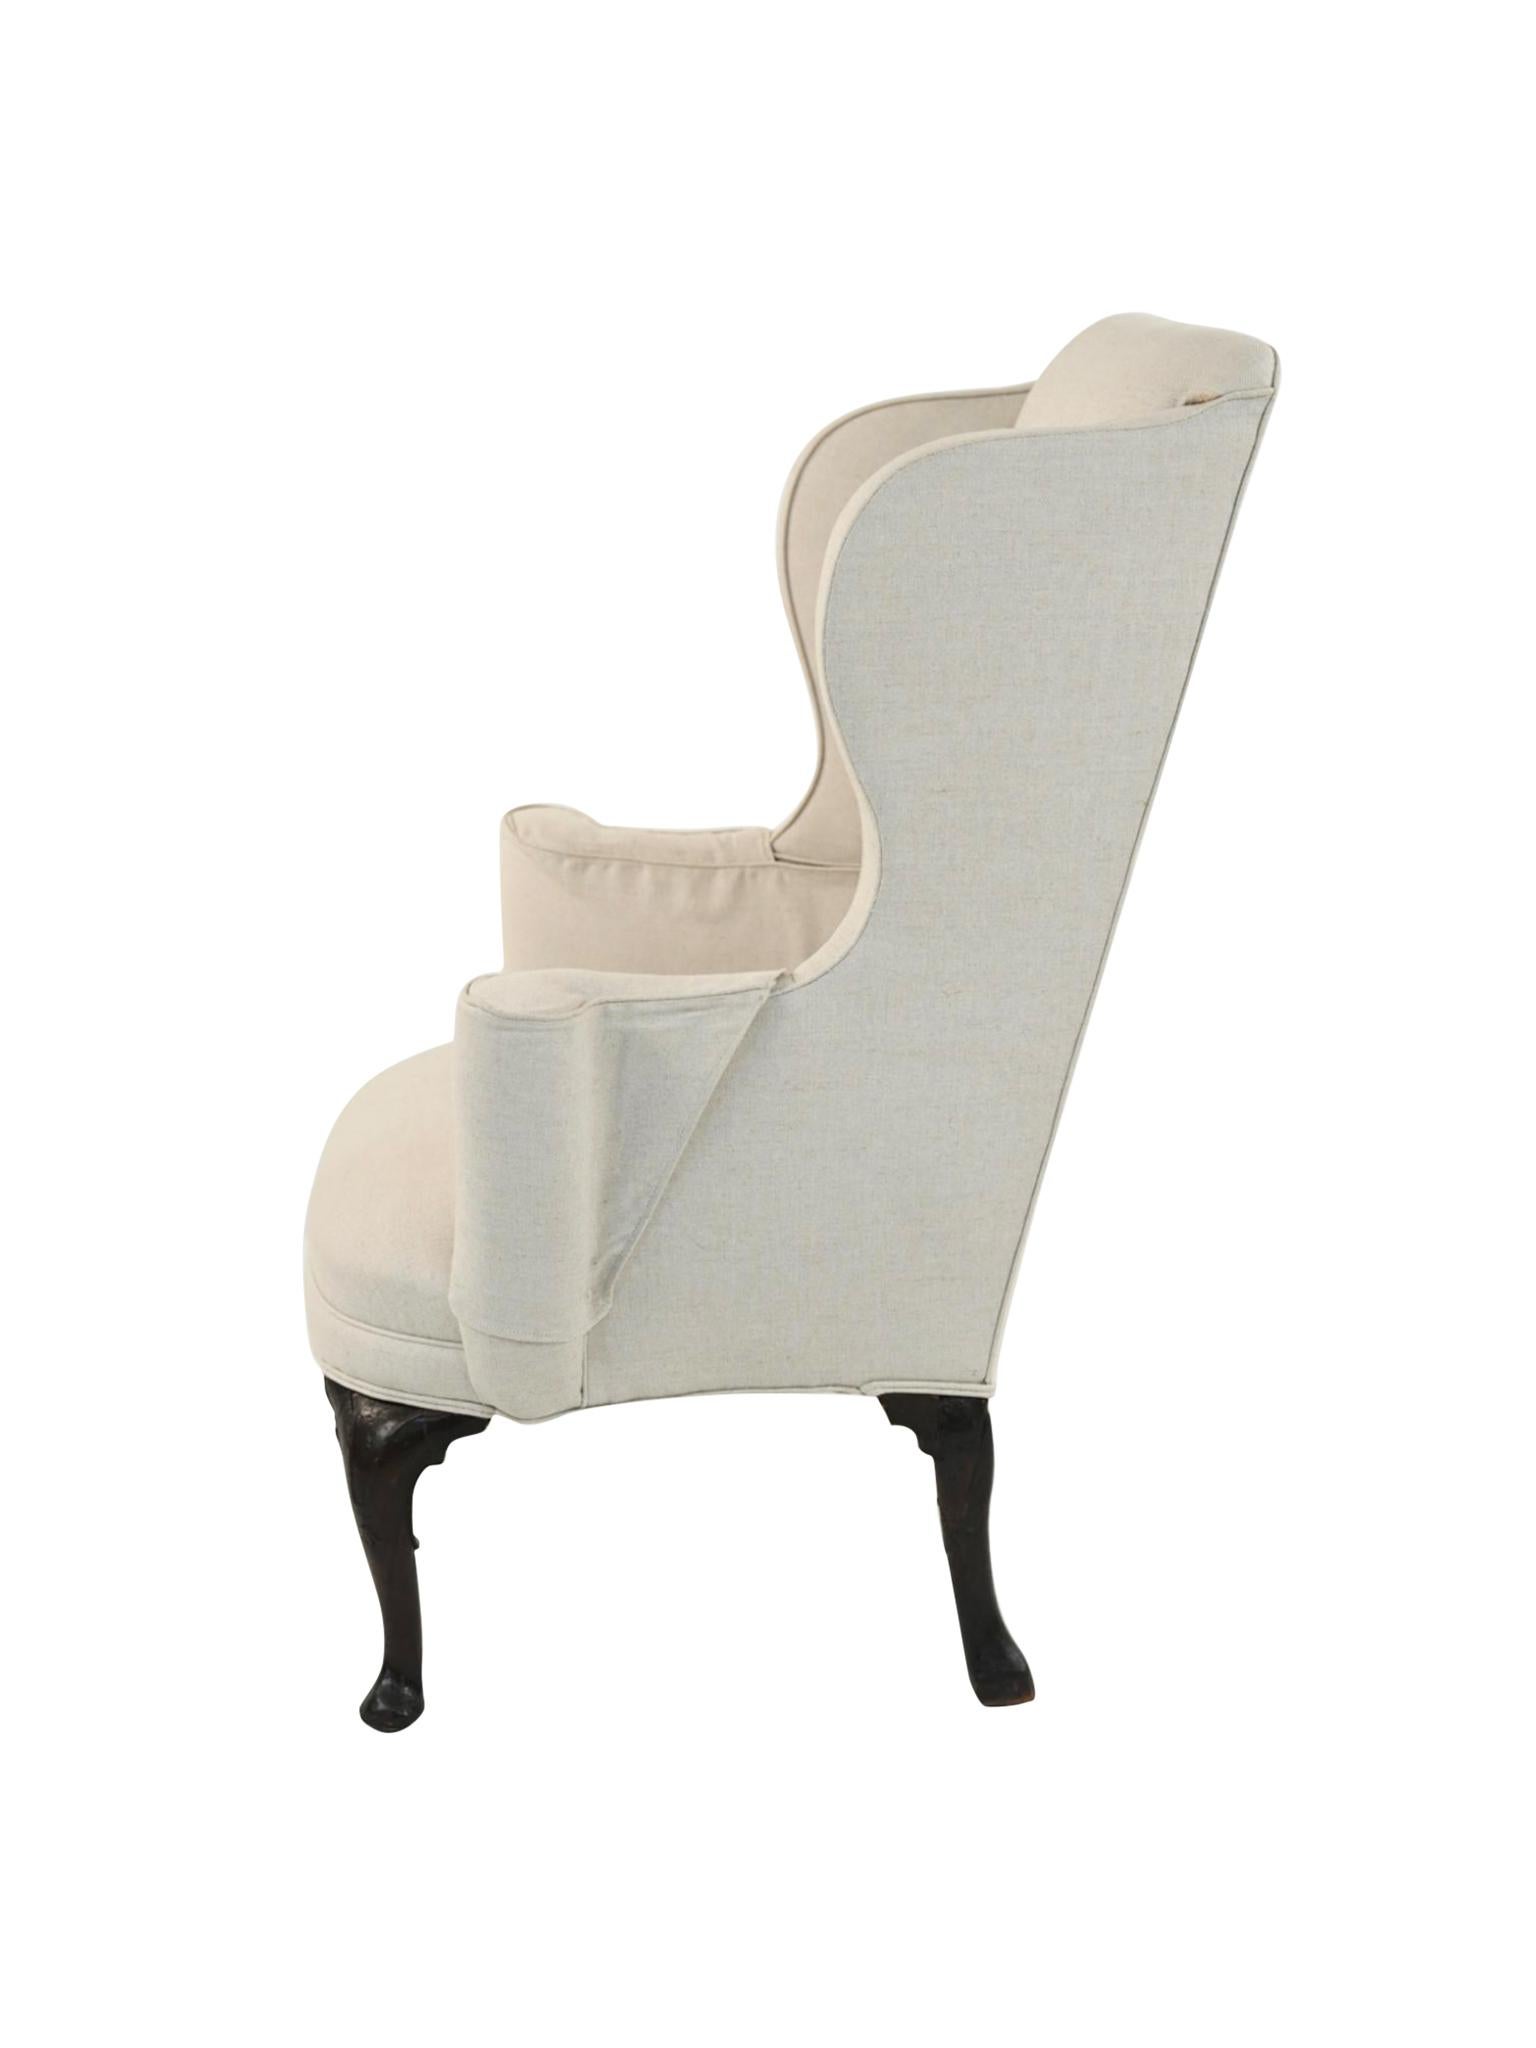 Hand-Crafted 18th Century American Queen Anne Wingback Armchair